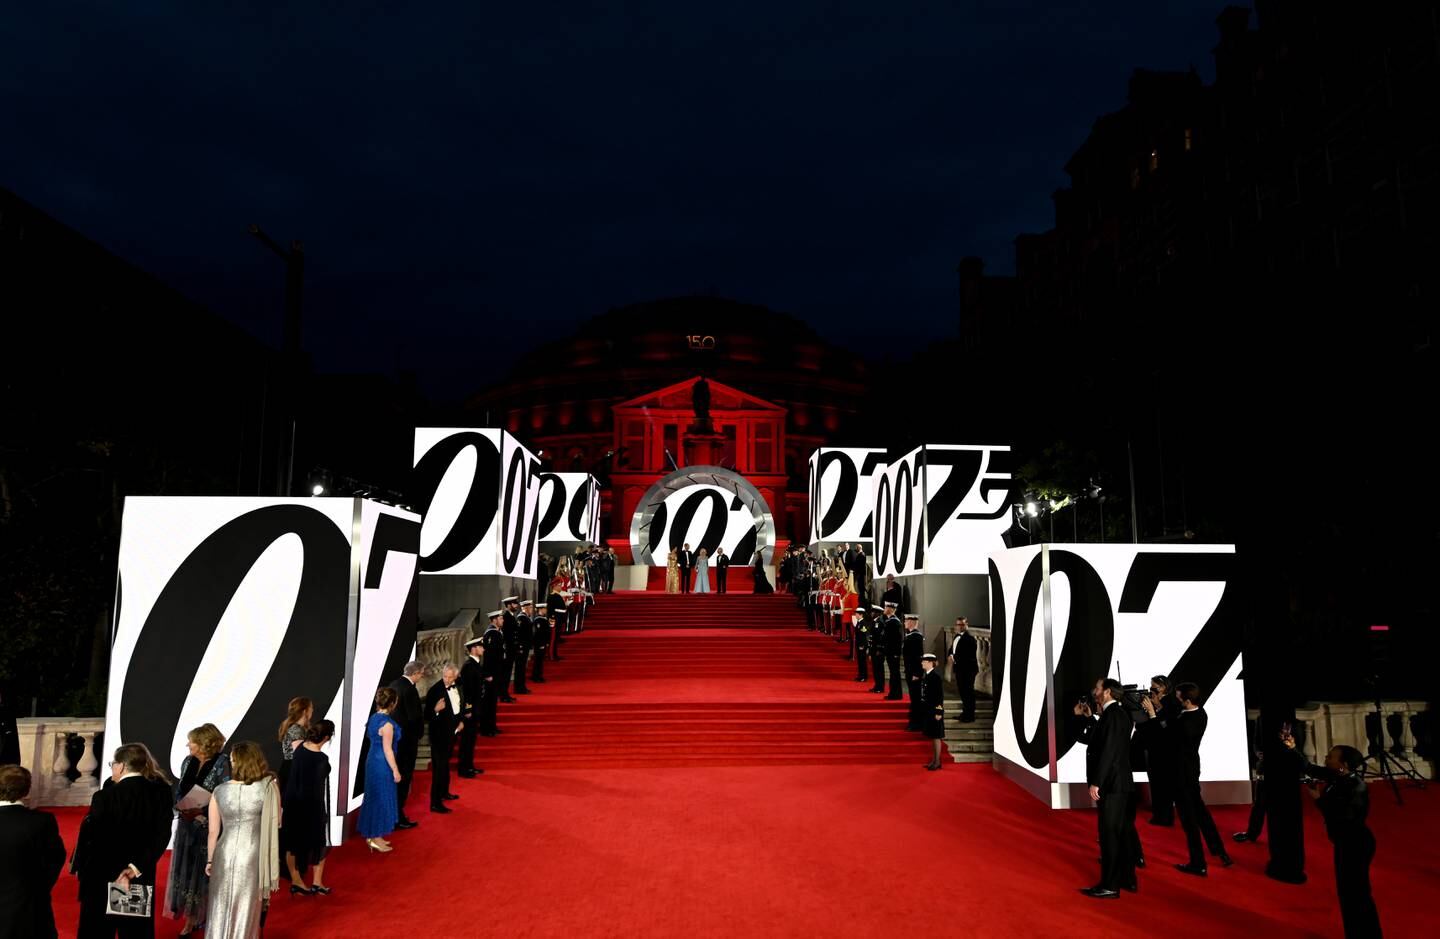 The red carpet at the world premiere of 'No Time To Die' at the Royal Albert Hall in London. Getty